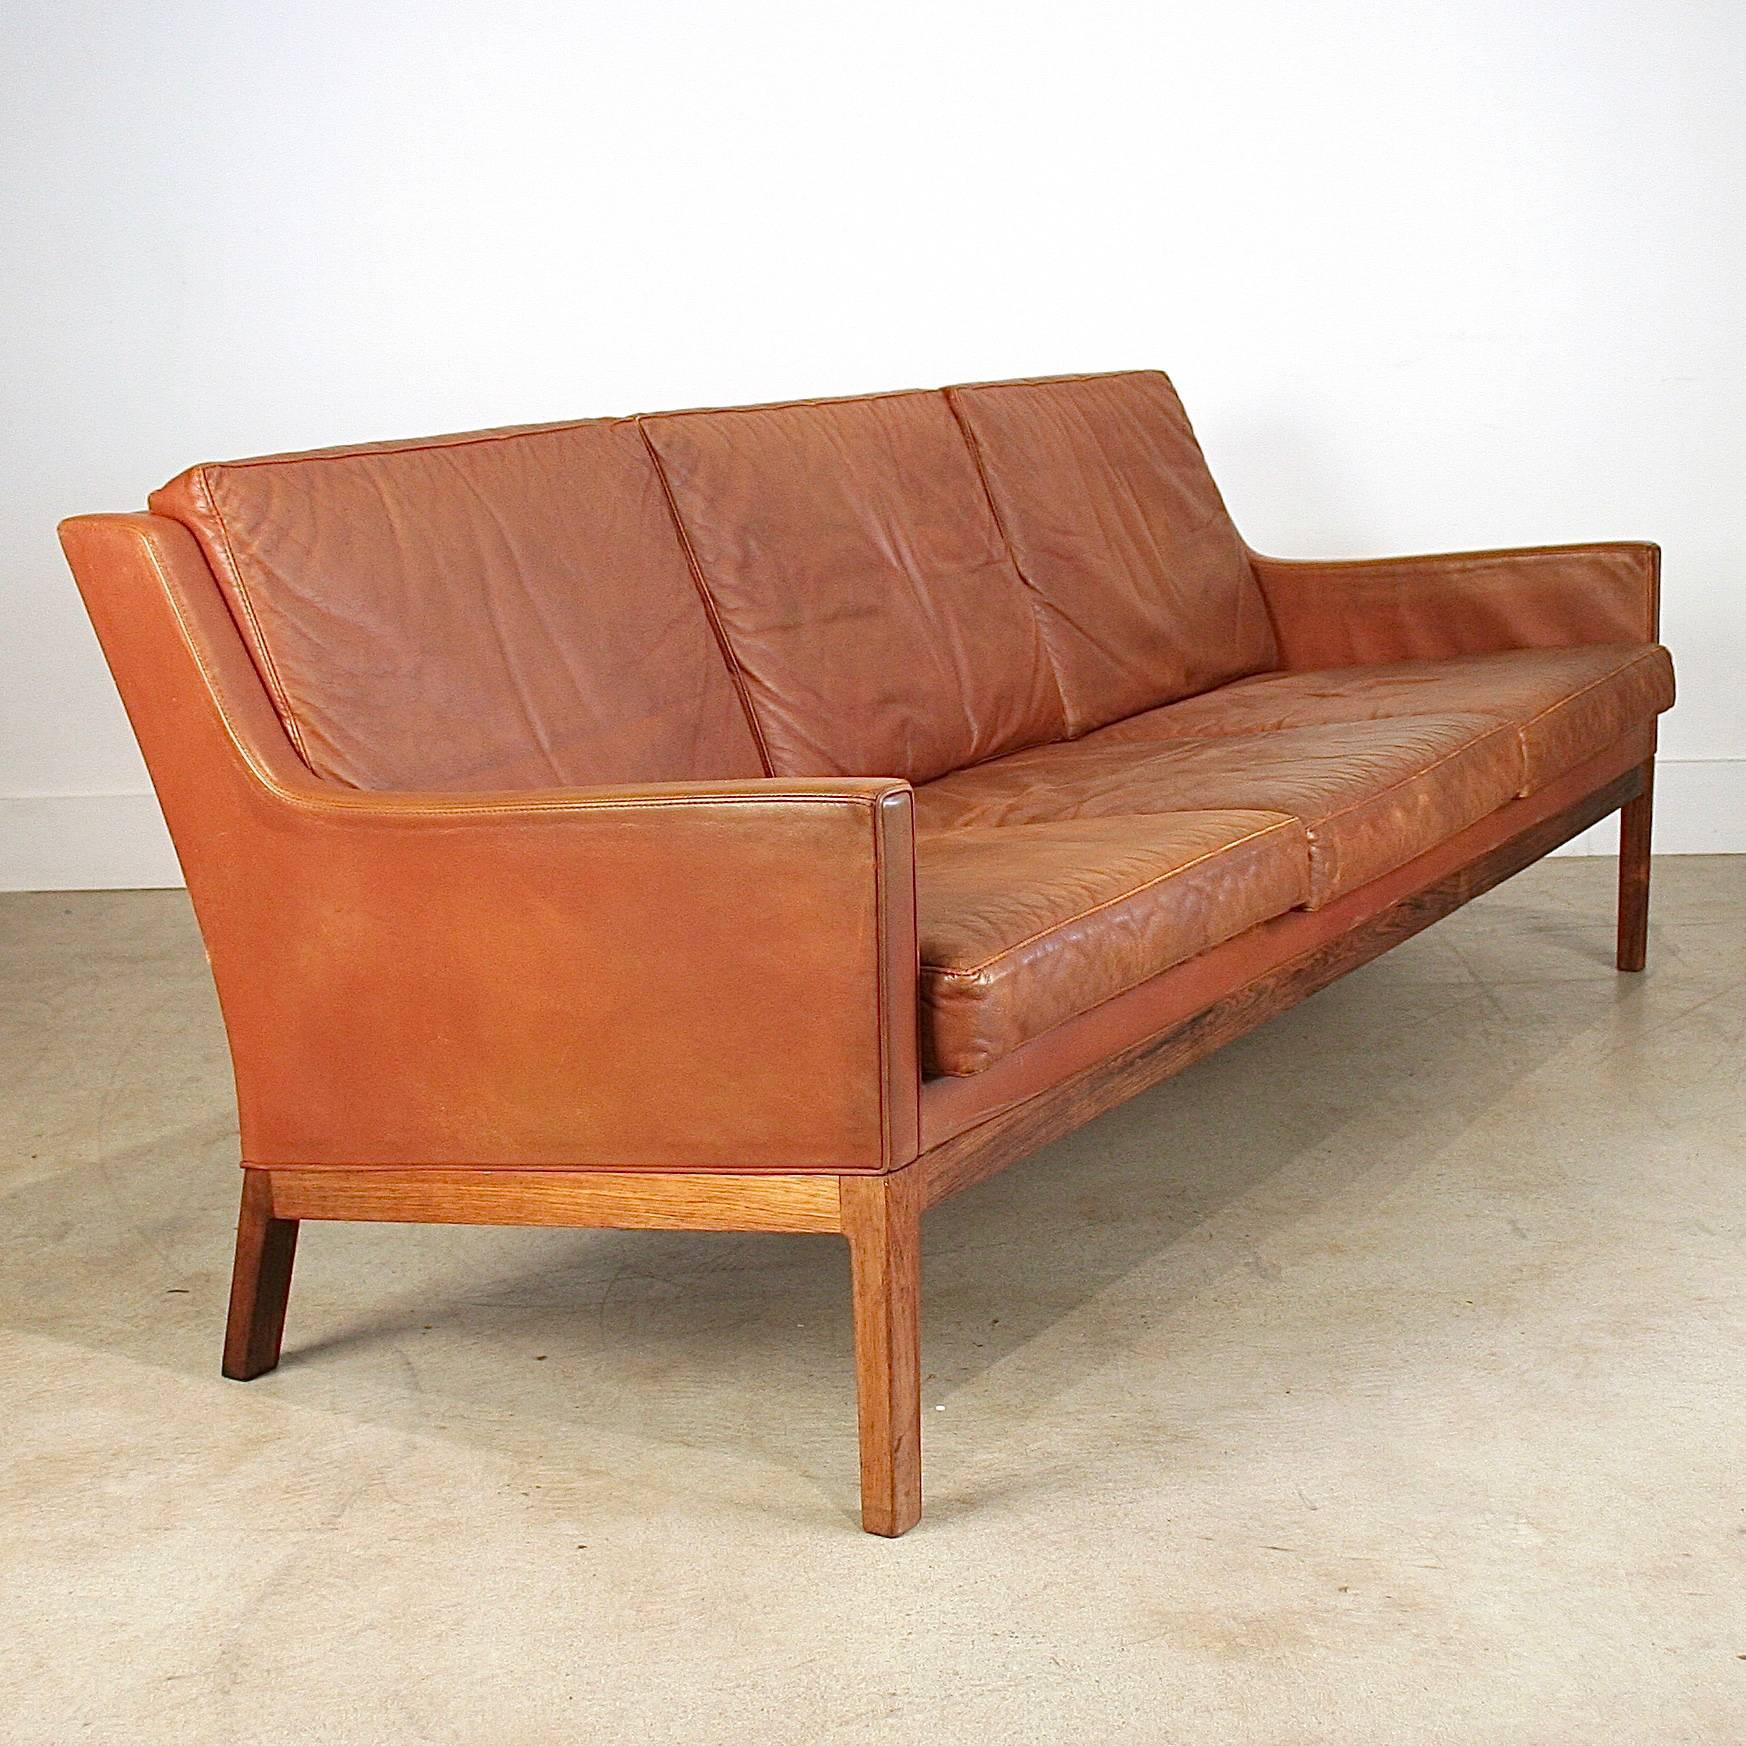 Beautiful vintage Danish leather three-seat sofa on rosewood base. Three loose seat back cushions over three loose seat cushions. Wonderful 1960s modern piece. Made in Denmark.